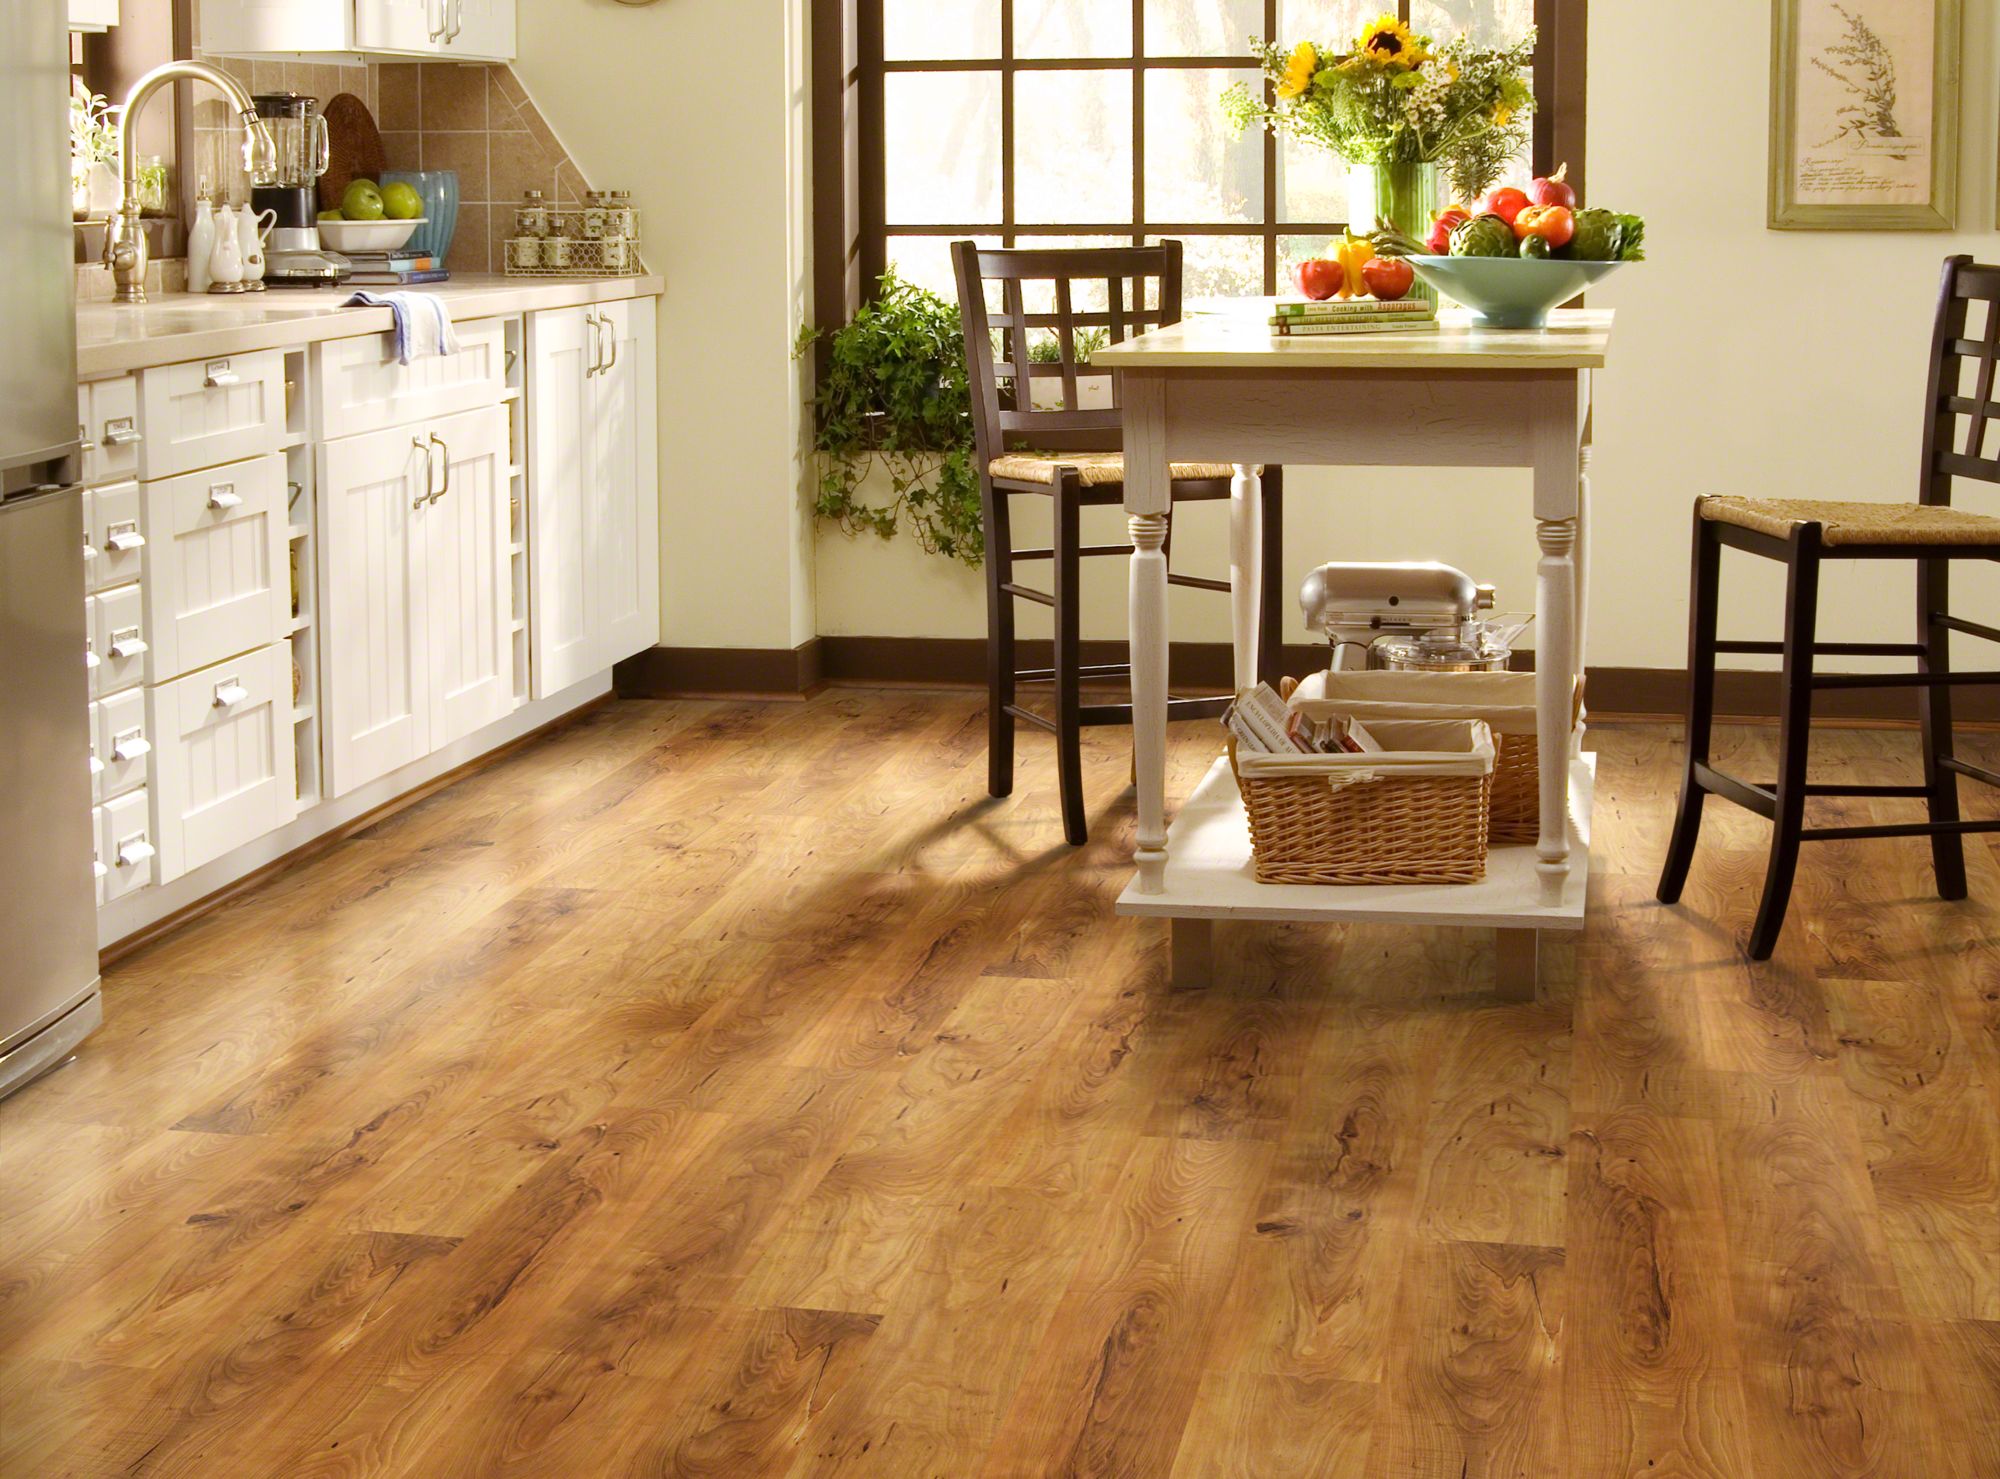 Laminate flooring in a kitchen, patterned to look like a hardwood floor